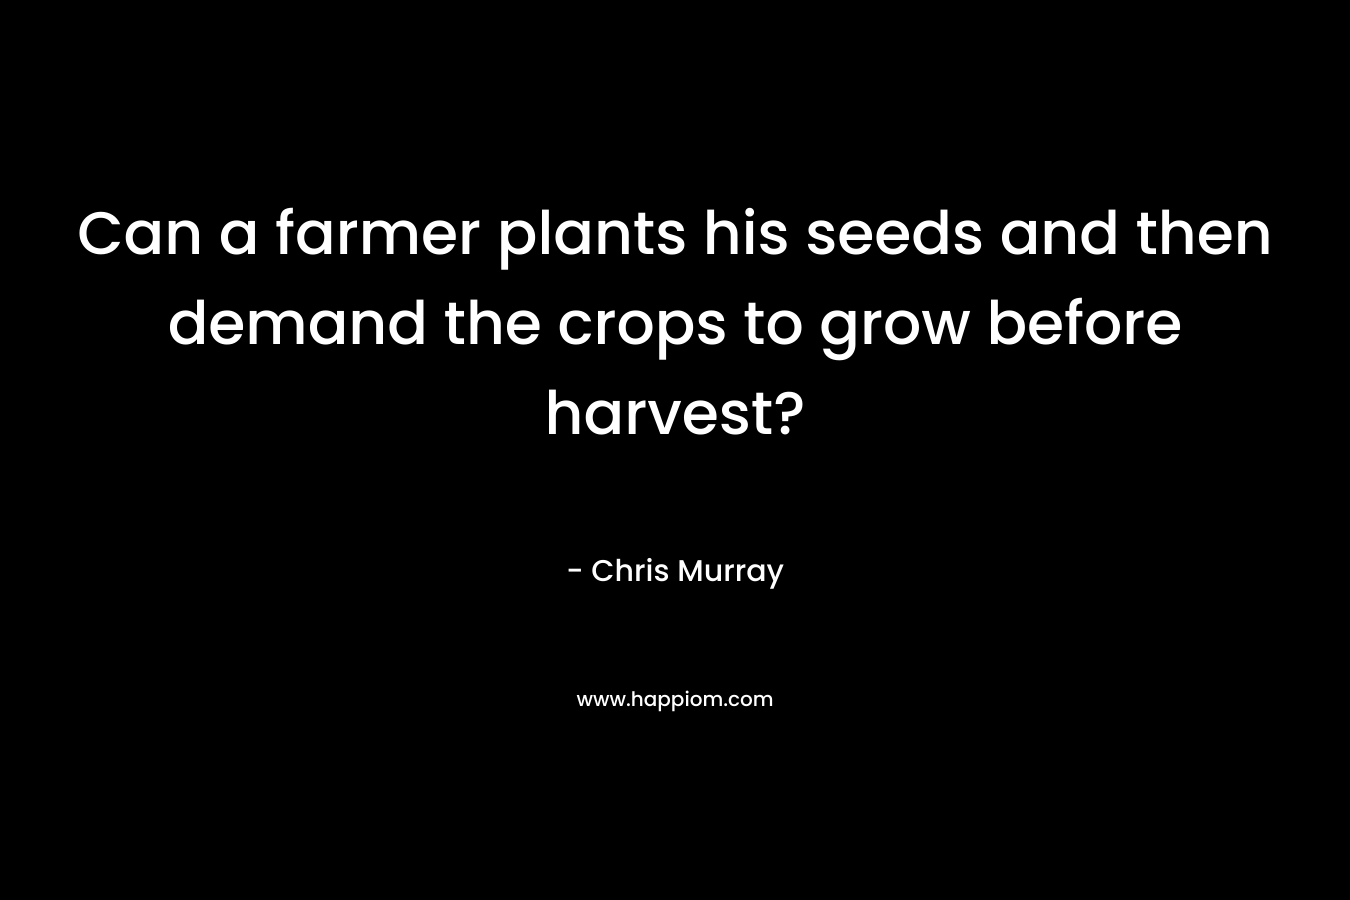 Can a farmer plants his seeds and then demand the crops to grow before harvest?